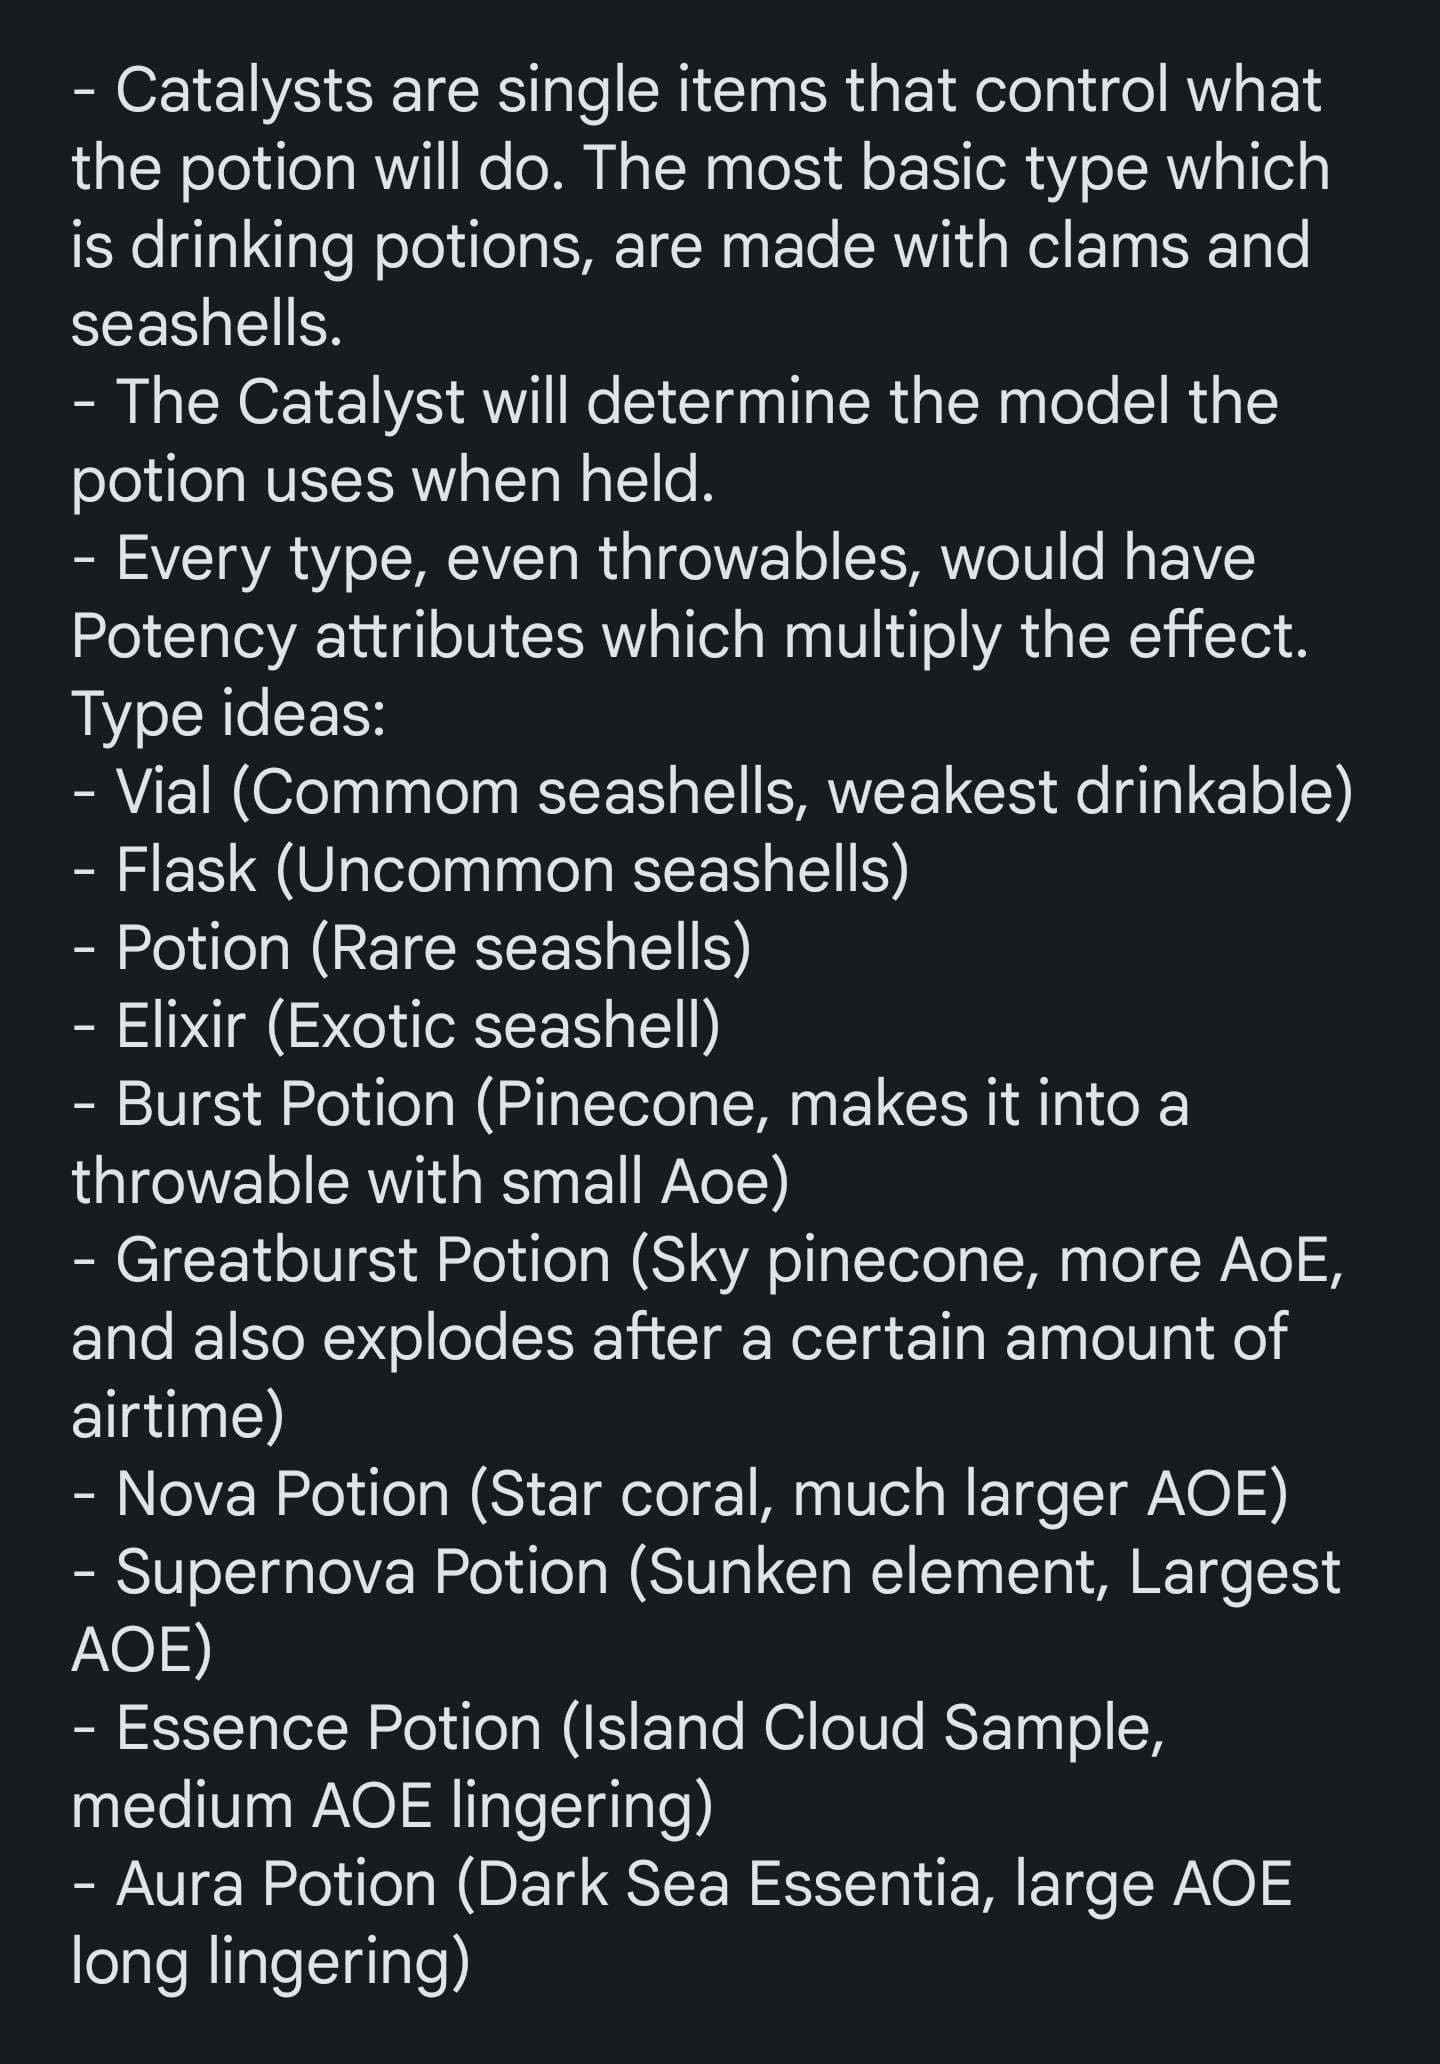 Potion/Brewing System Plans - Game Discussion - Arcane Odyssey